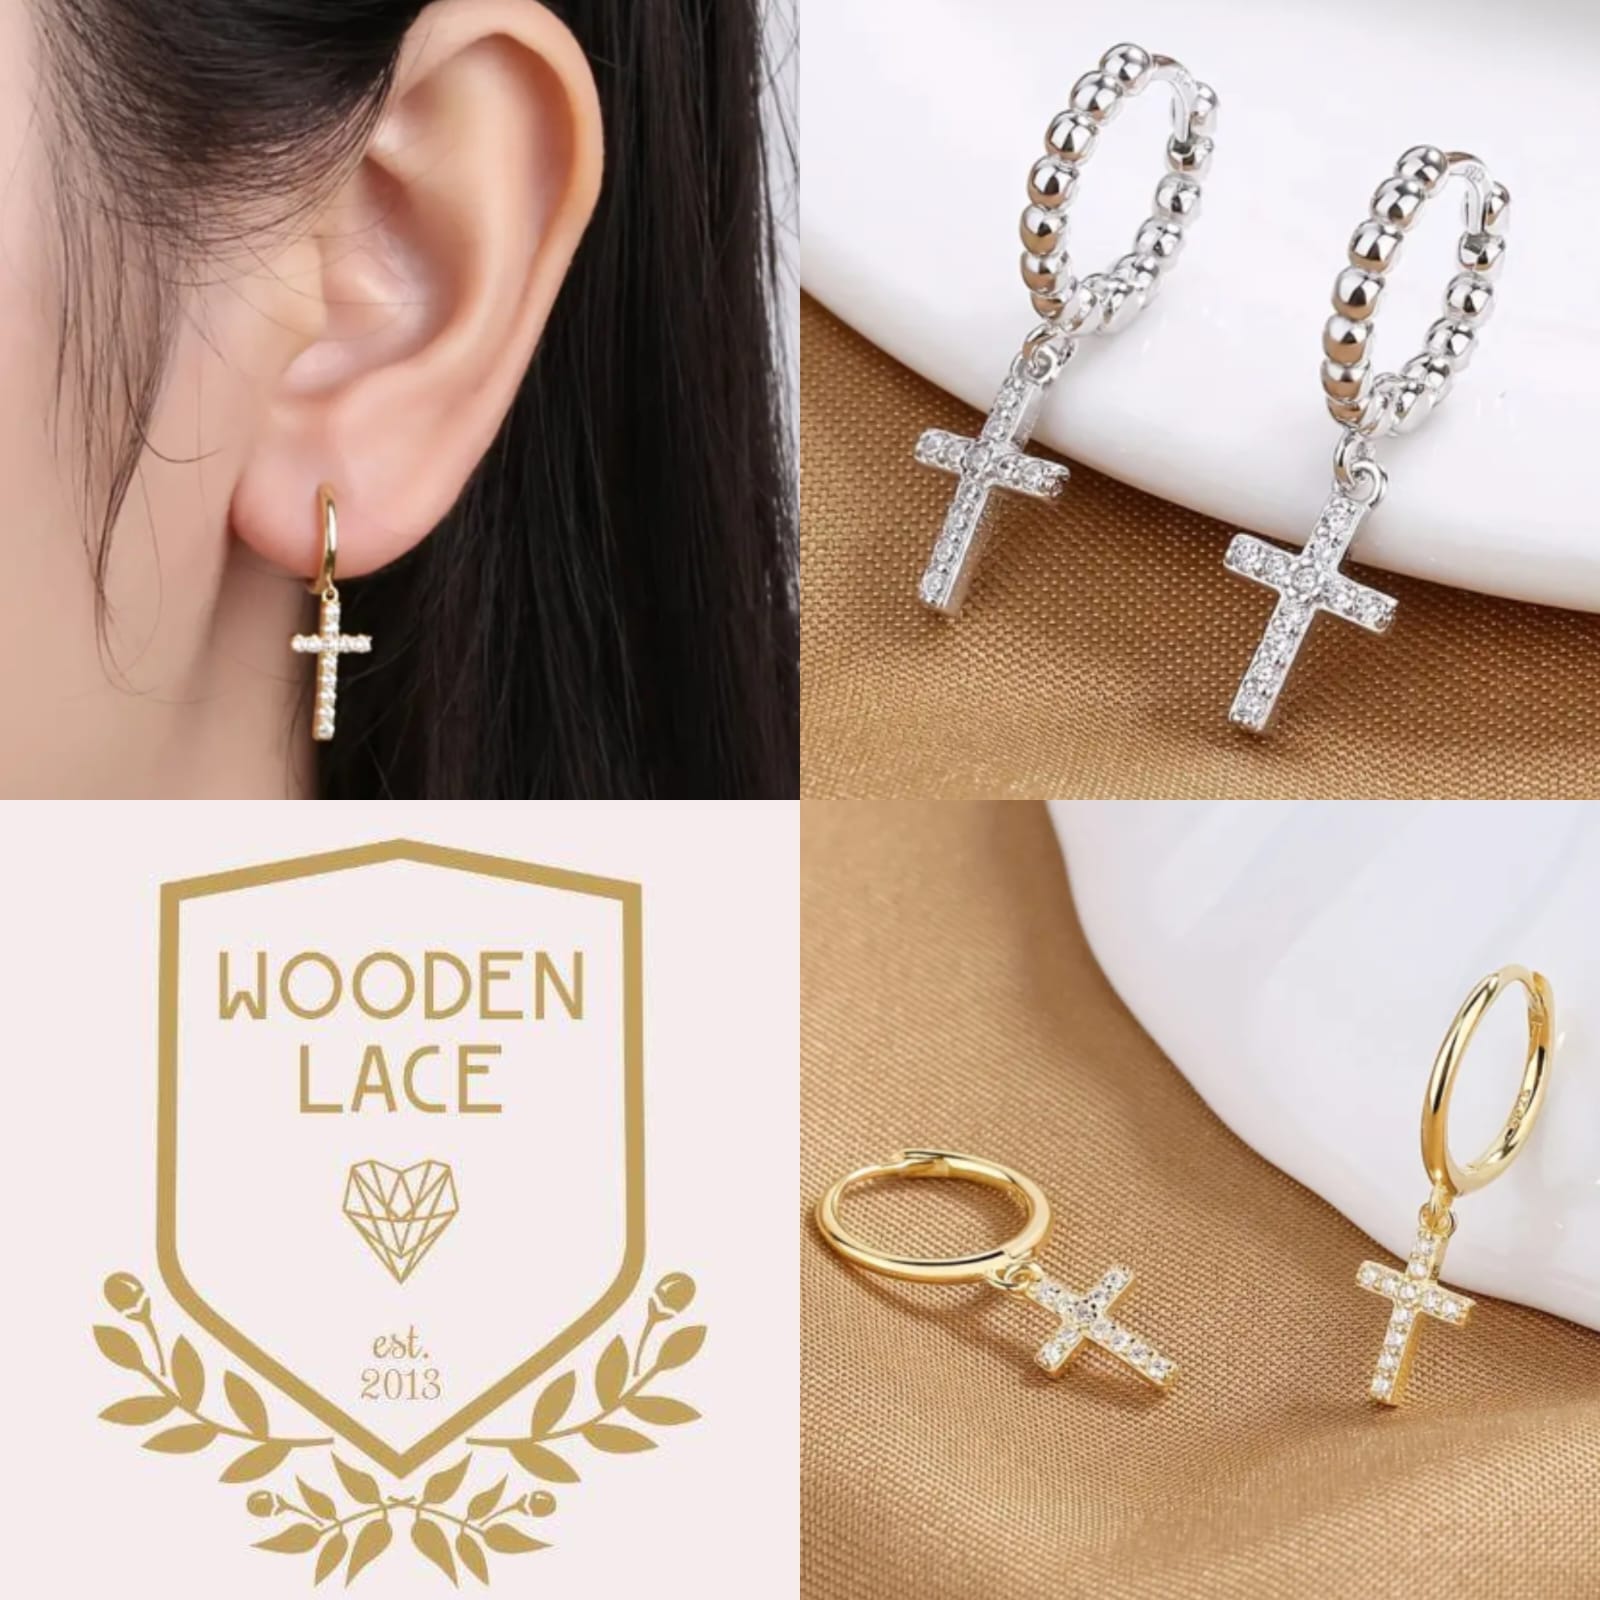 Sterling silver 925 or 14k gold coated cross earrings. R750 a set. Waterproof and tarnish-proof.